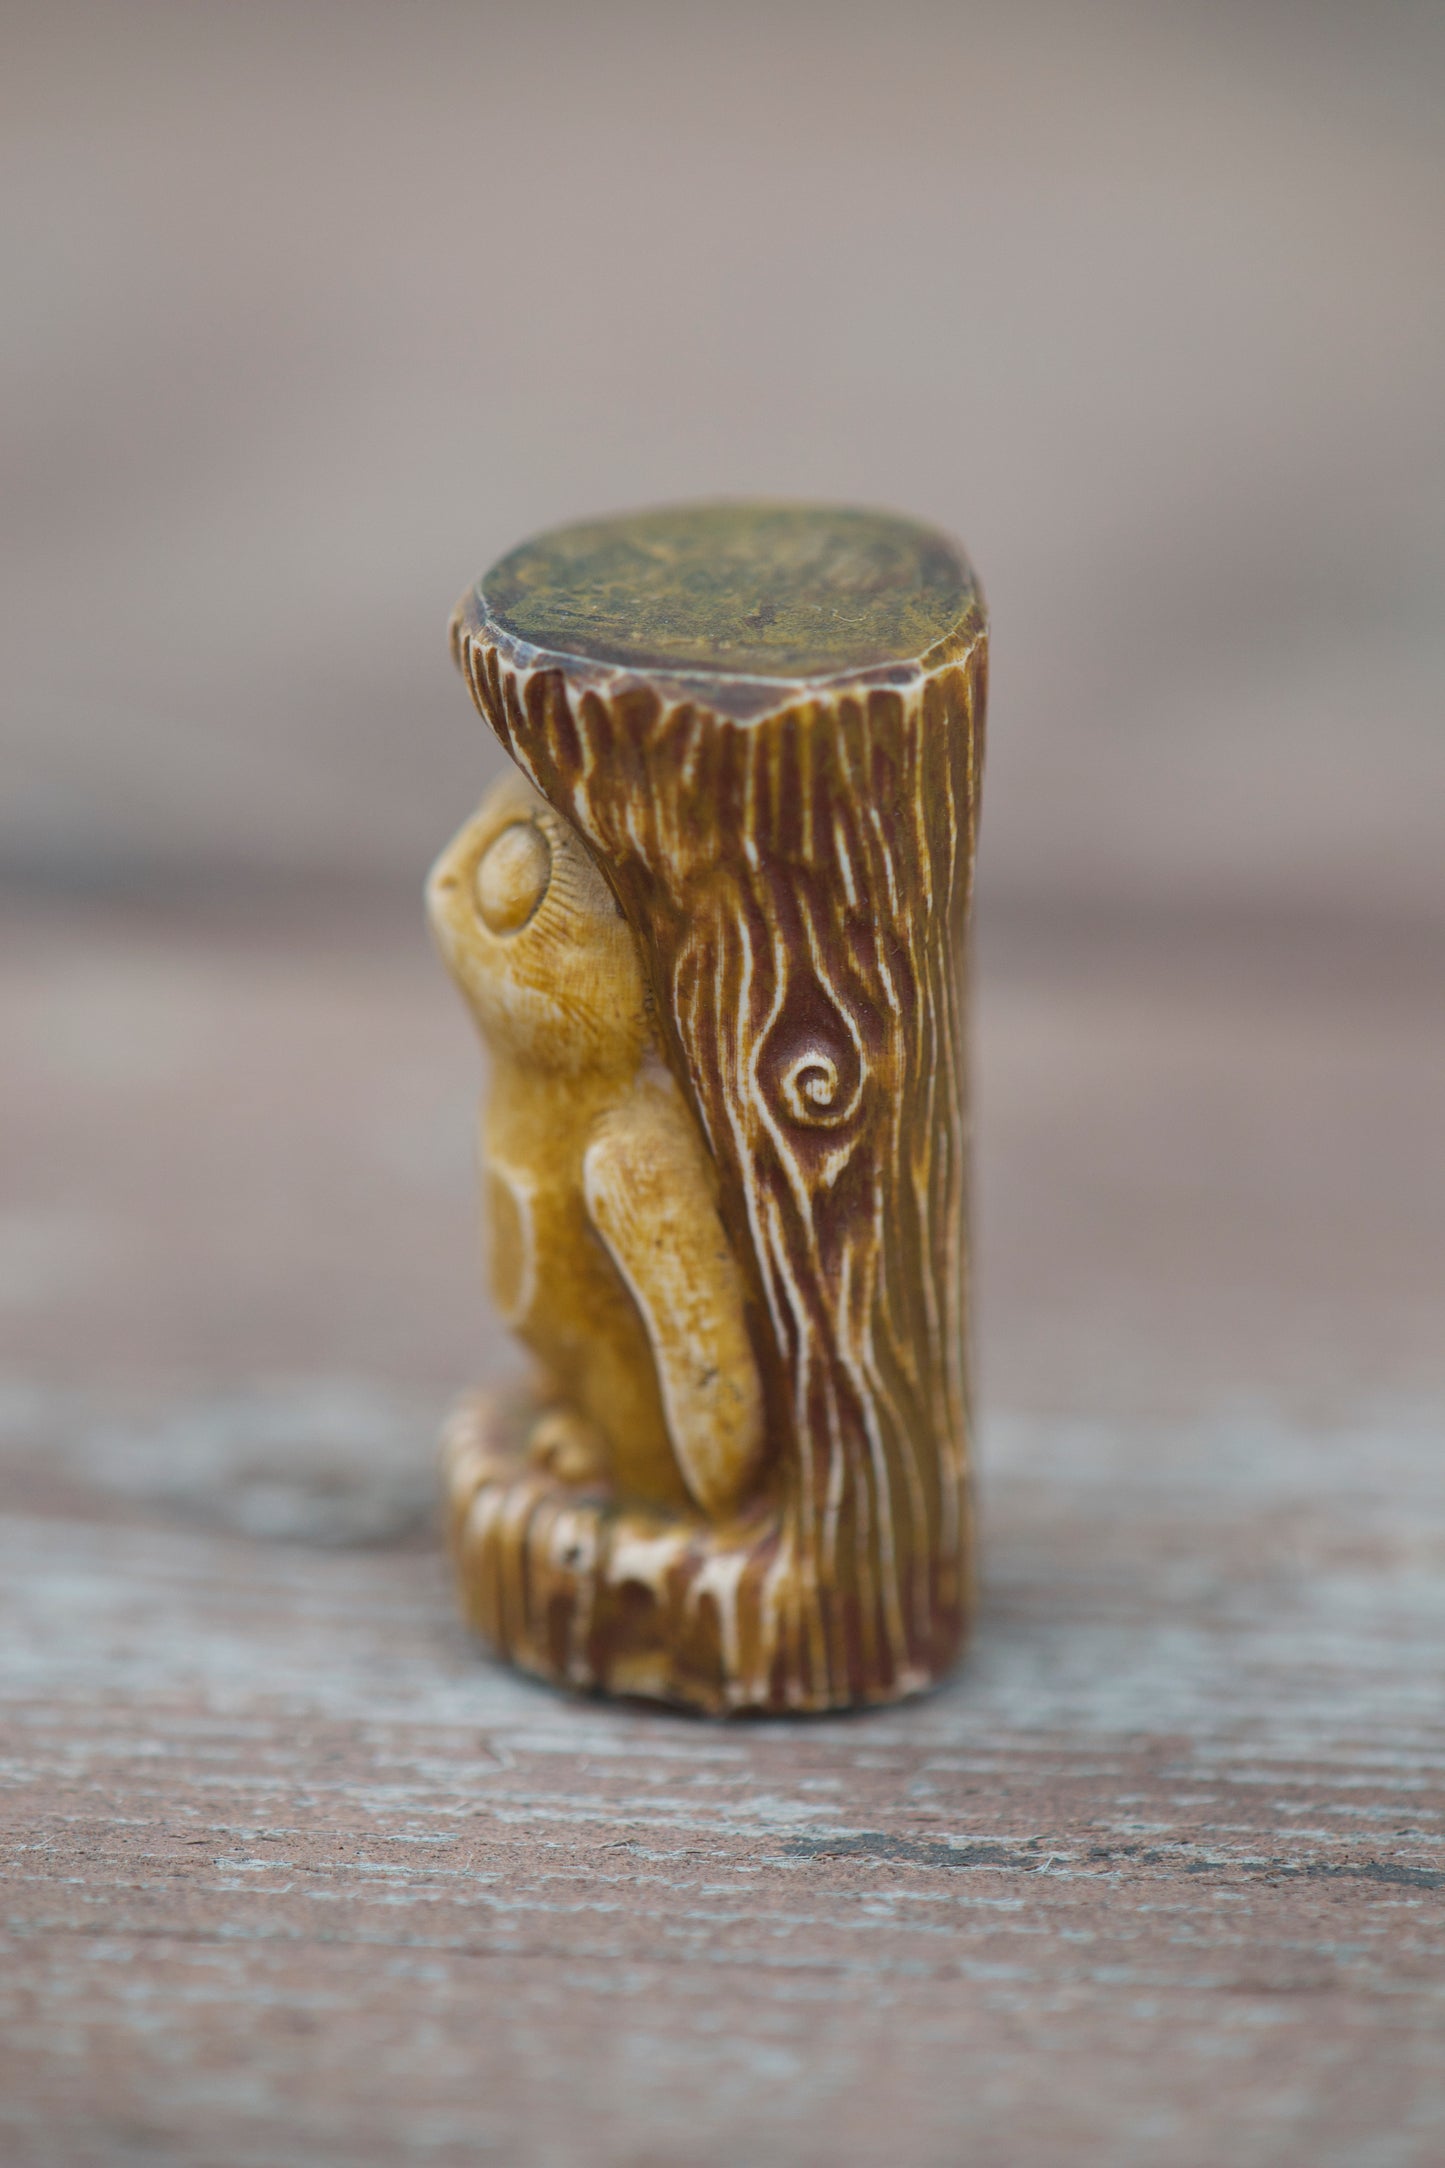 The Woodcarvers Crystal